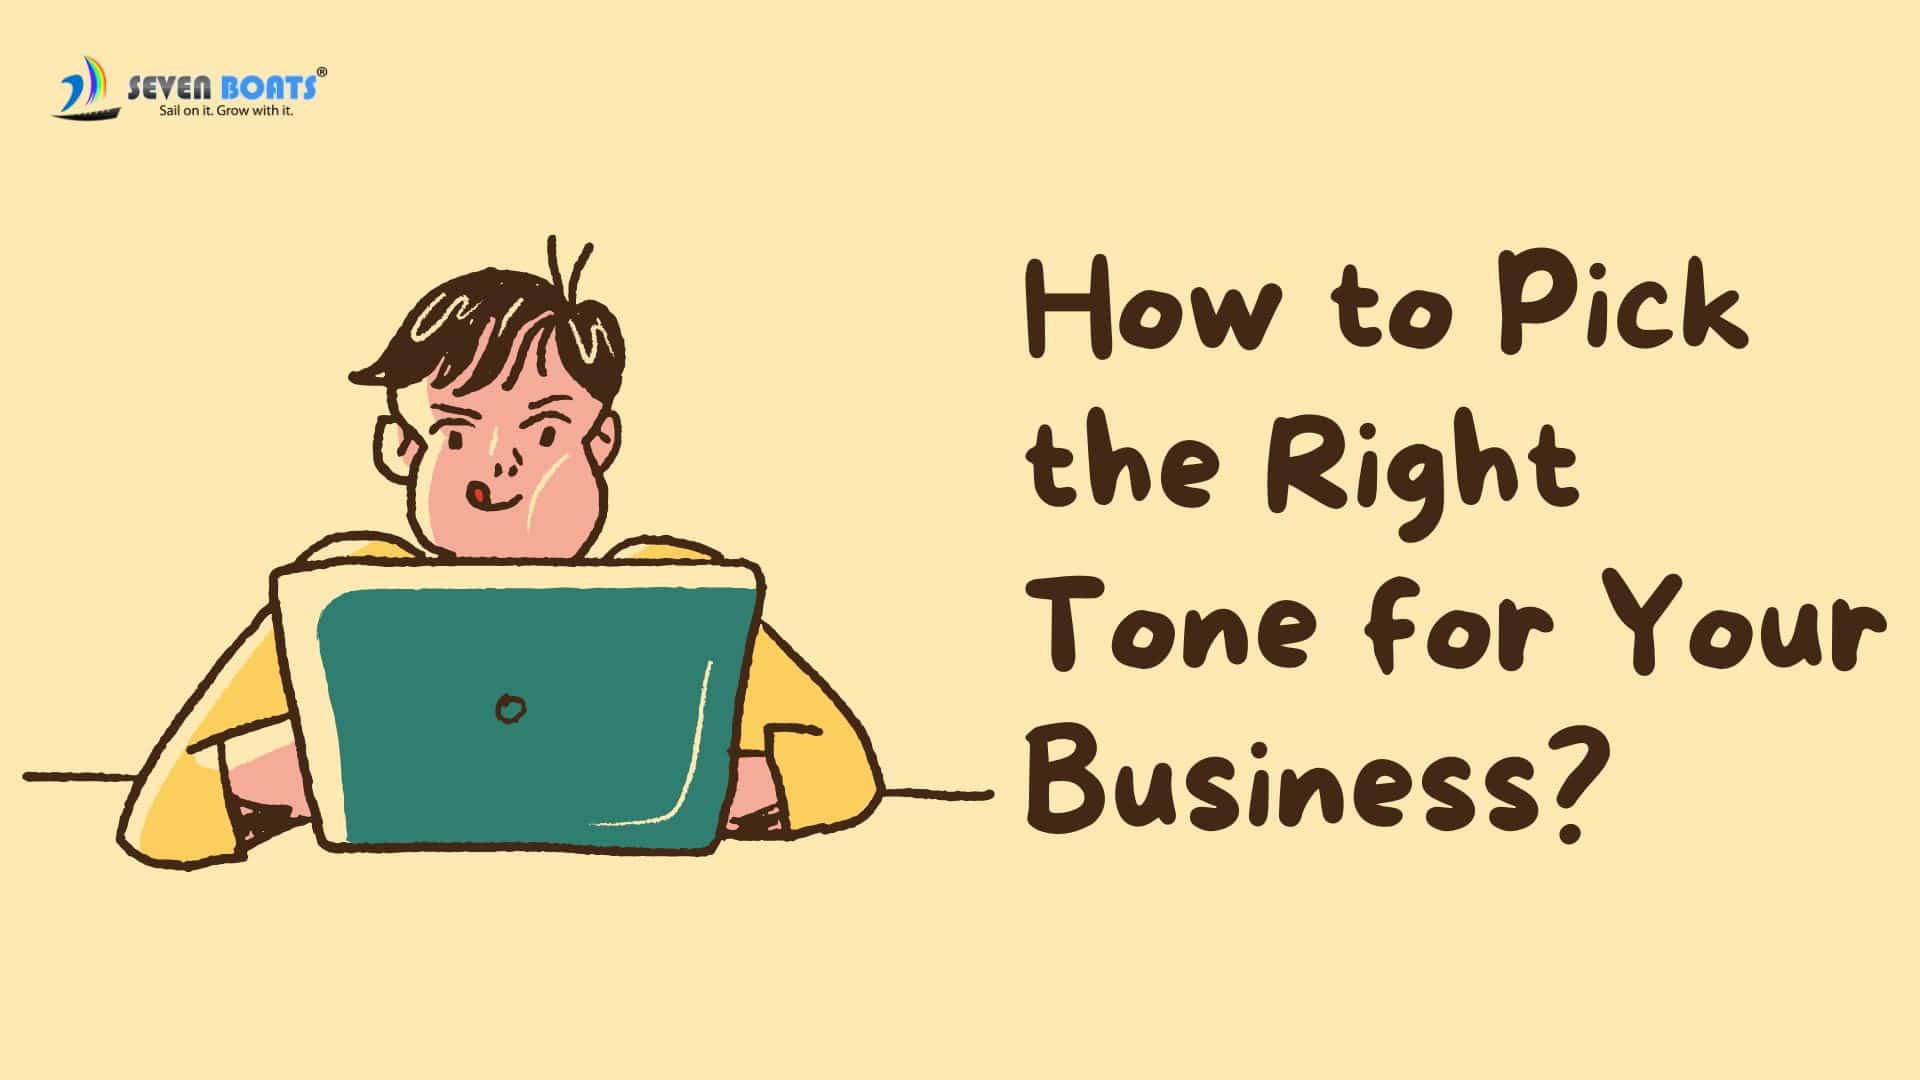 How to Pick the Right Tone for Your Business